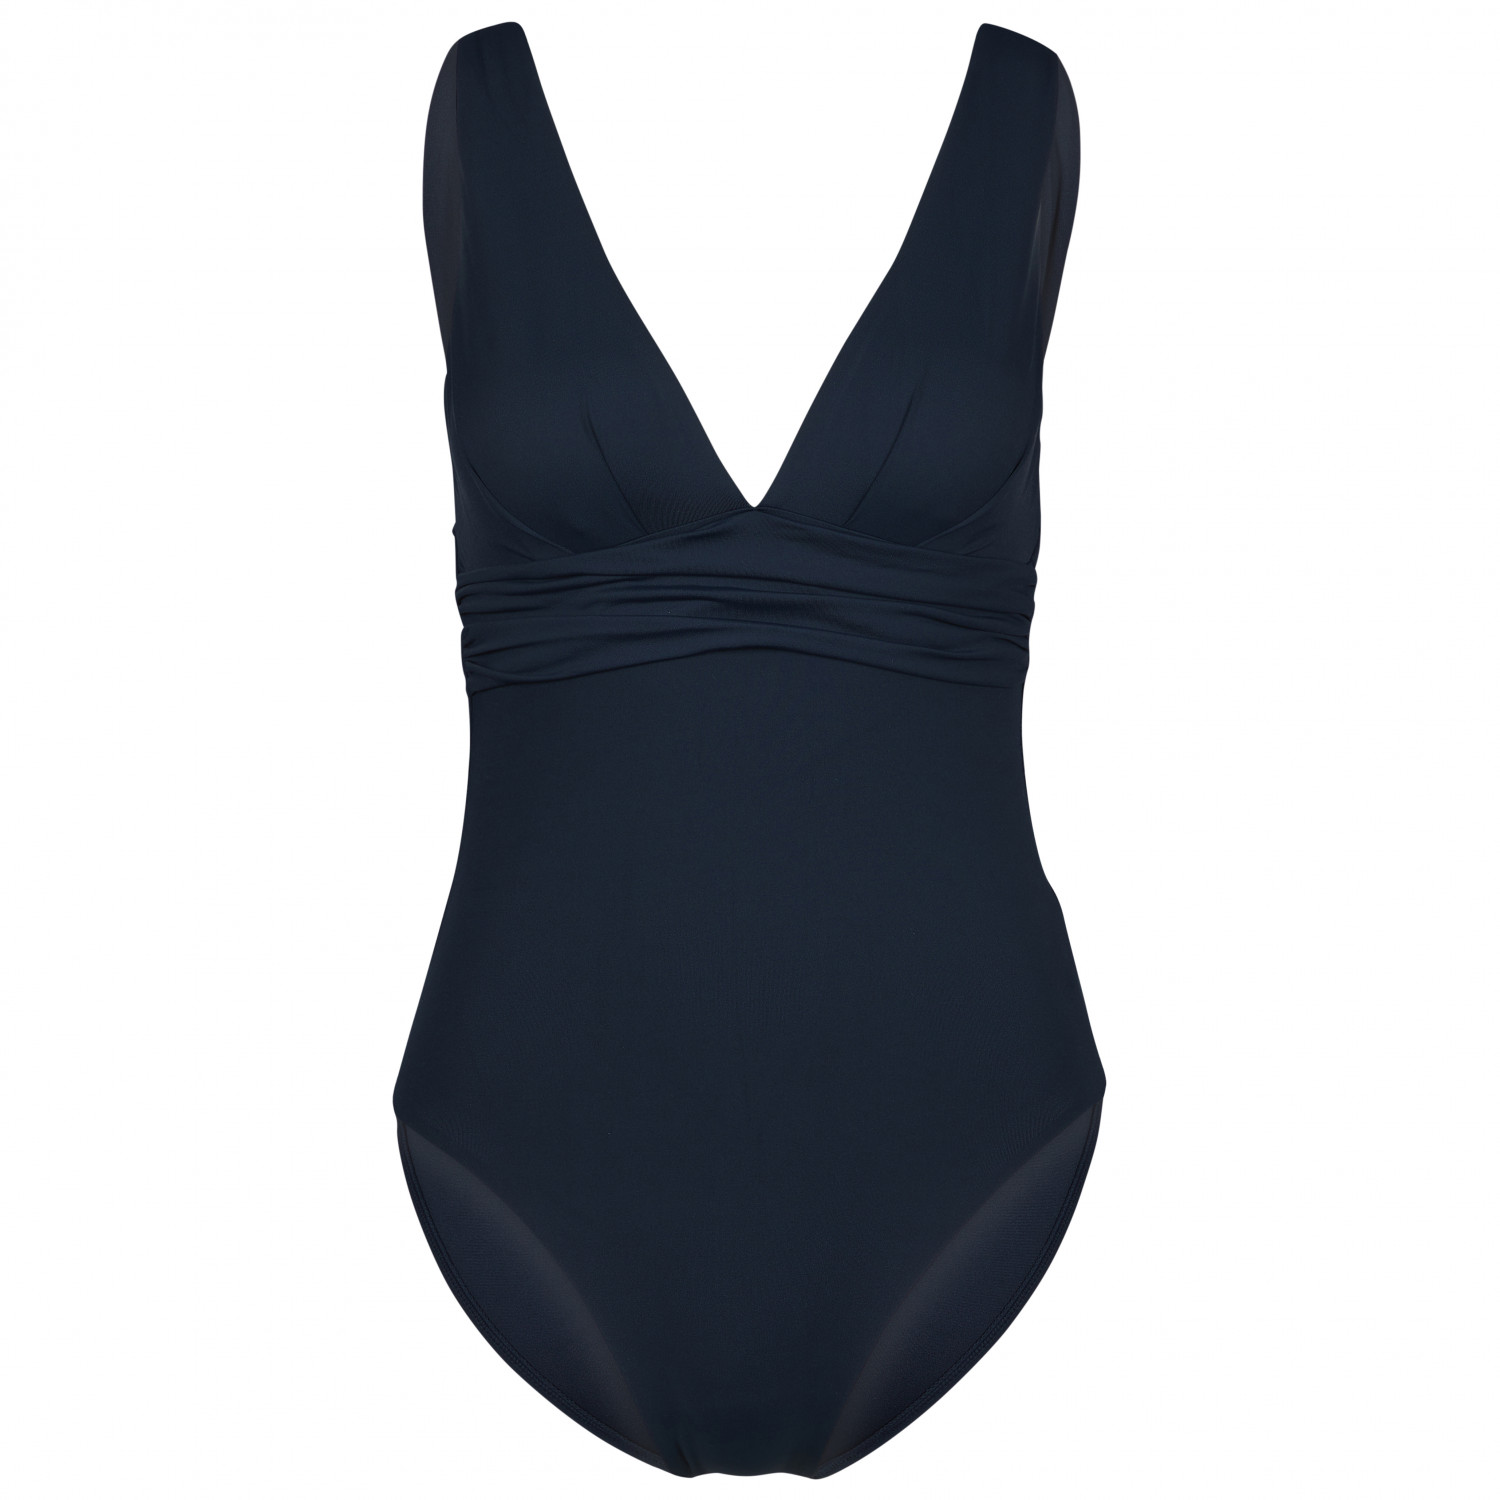 Купальник Seafolly Women's Collective Cross Back One Piece, цвет True Navy cross back vest top women lingerie pad sleeveless straps knitted tube tank tops one piece female camisoles